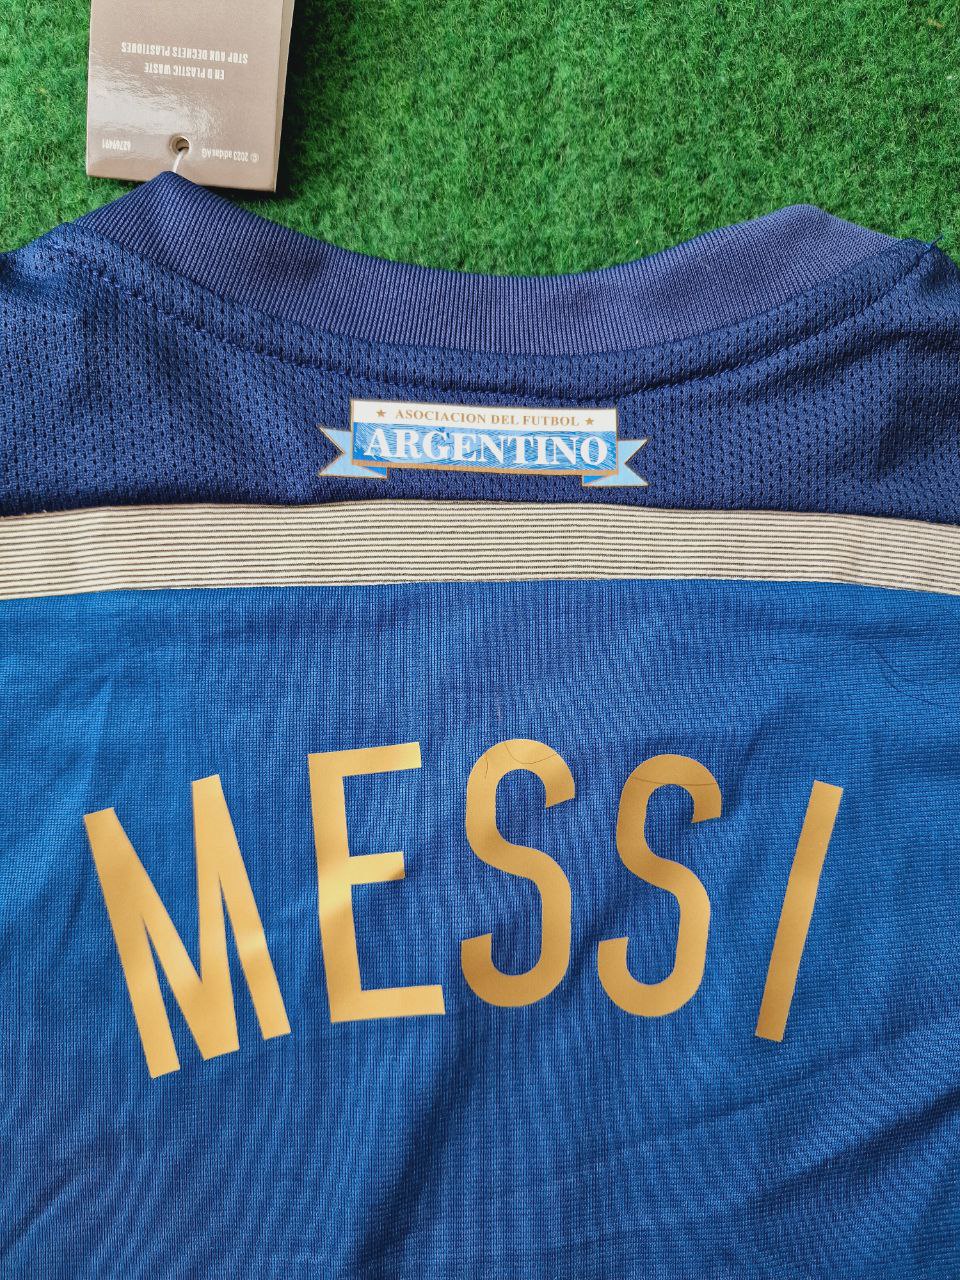 Lionel Messi Argentina 2014 World Cup Retro Football Jersey